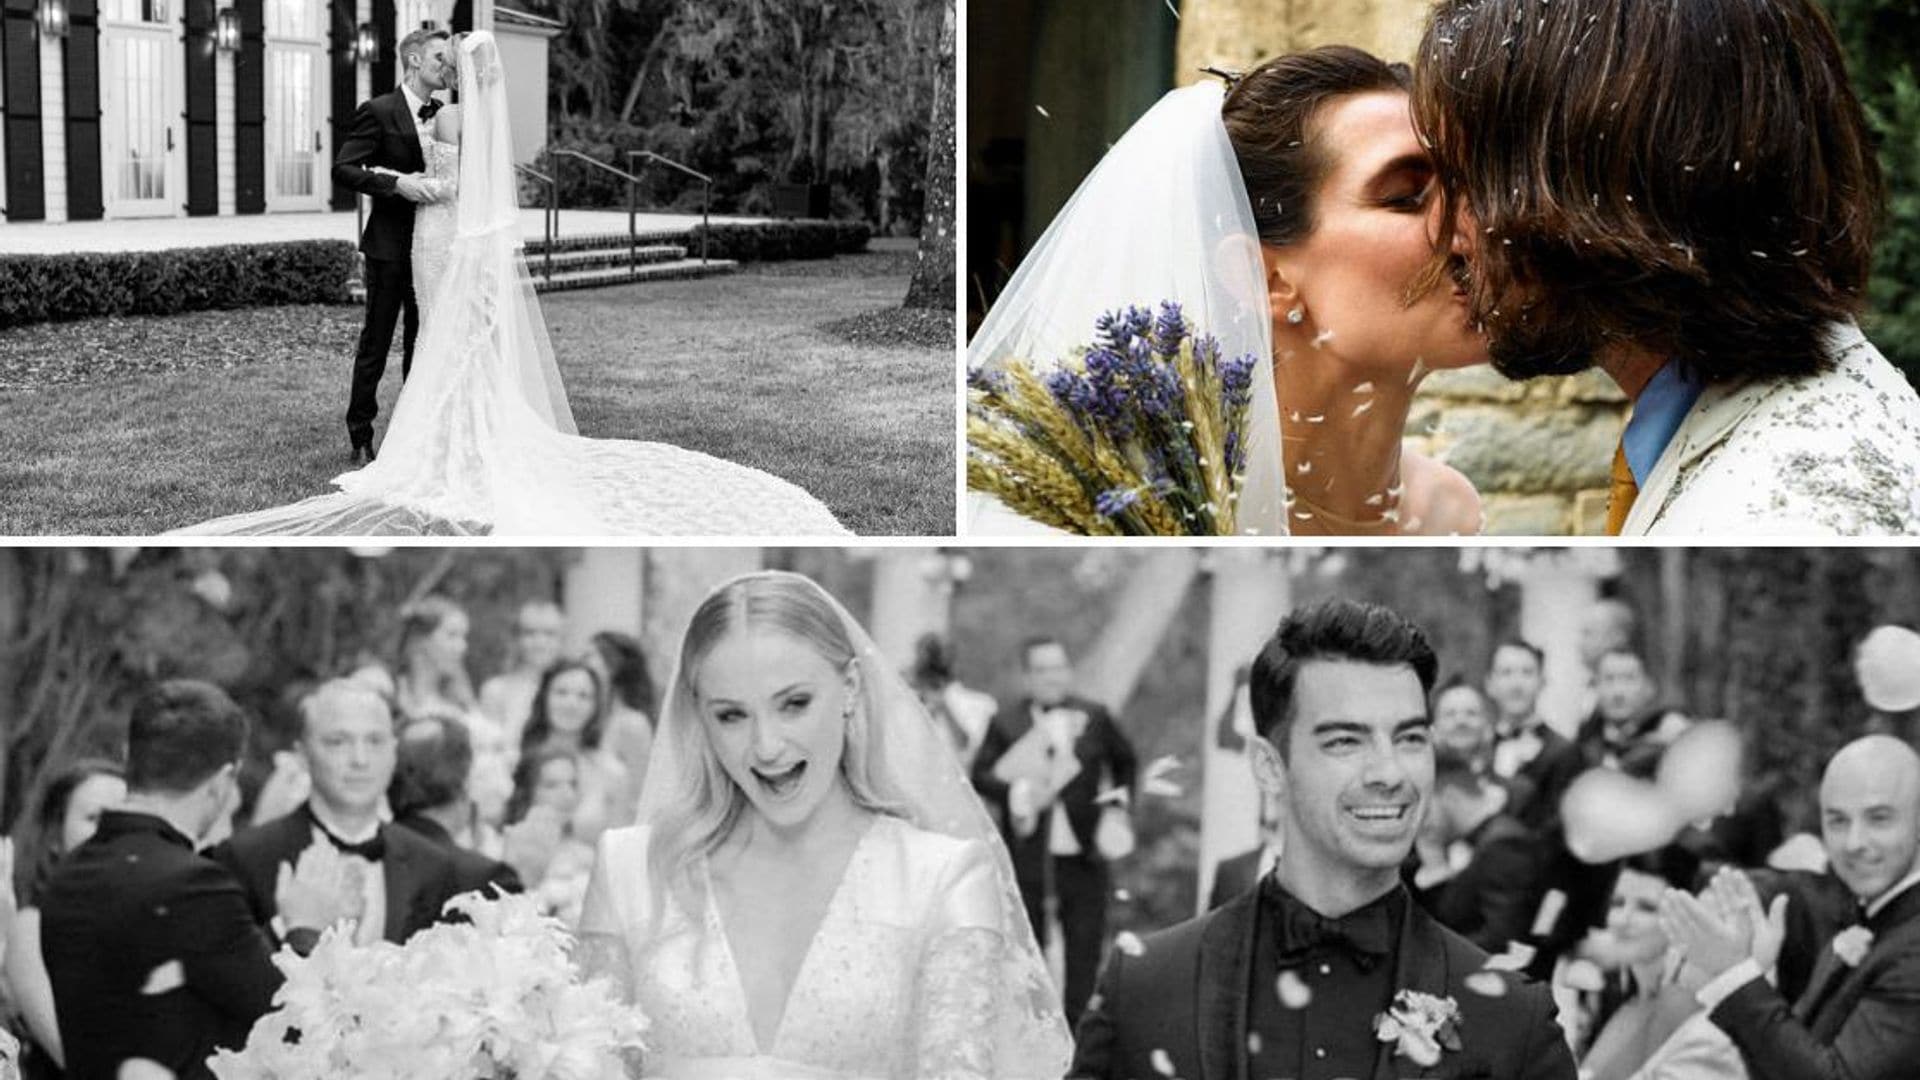 Weddings 2019 special: Charlotte Casiraghi, Joe Jonas and many more